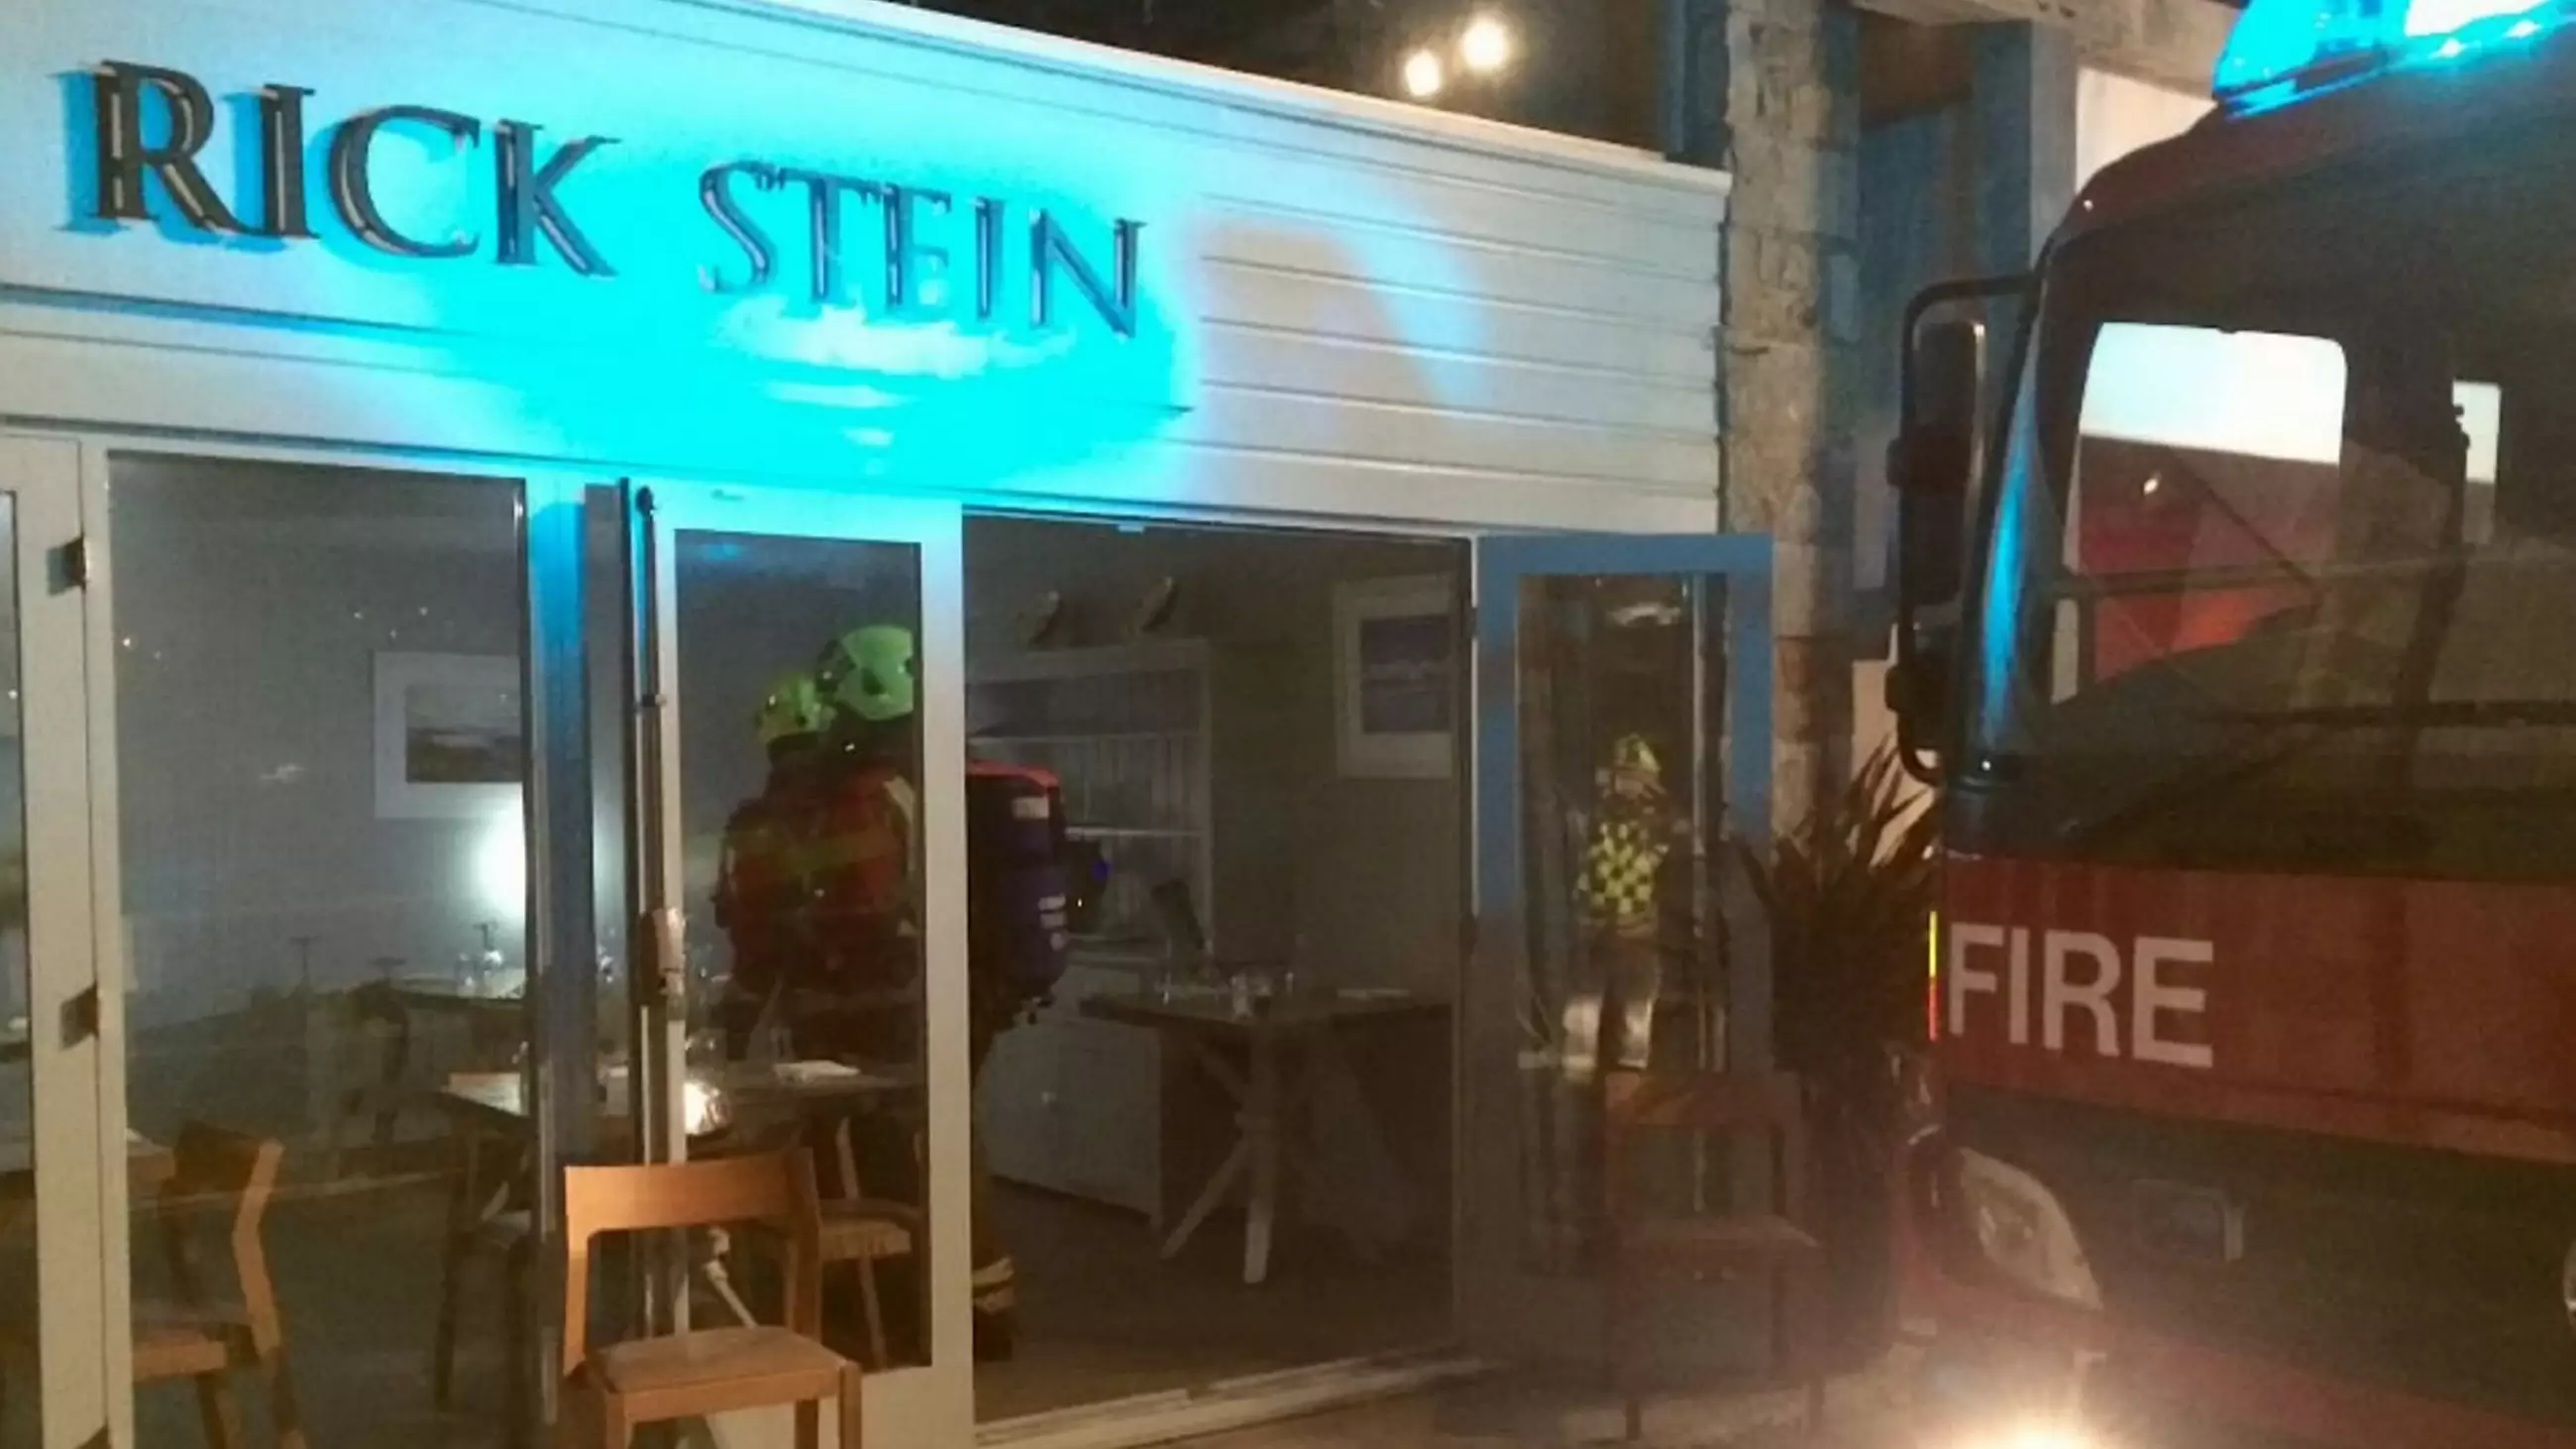 Cornish Militant Group Has Claimed Responsibility For Restaurant Fire Attack 